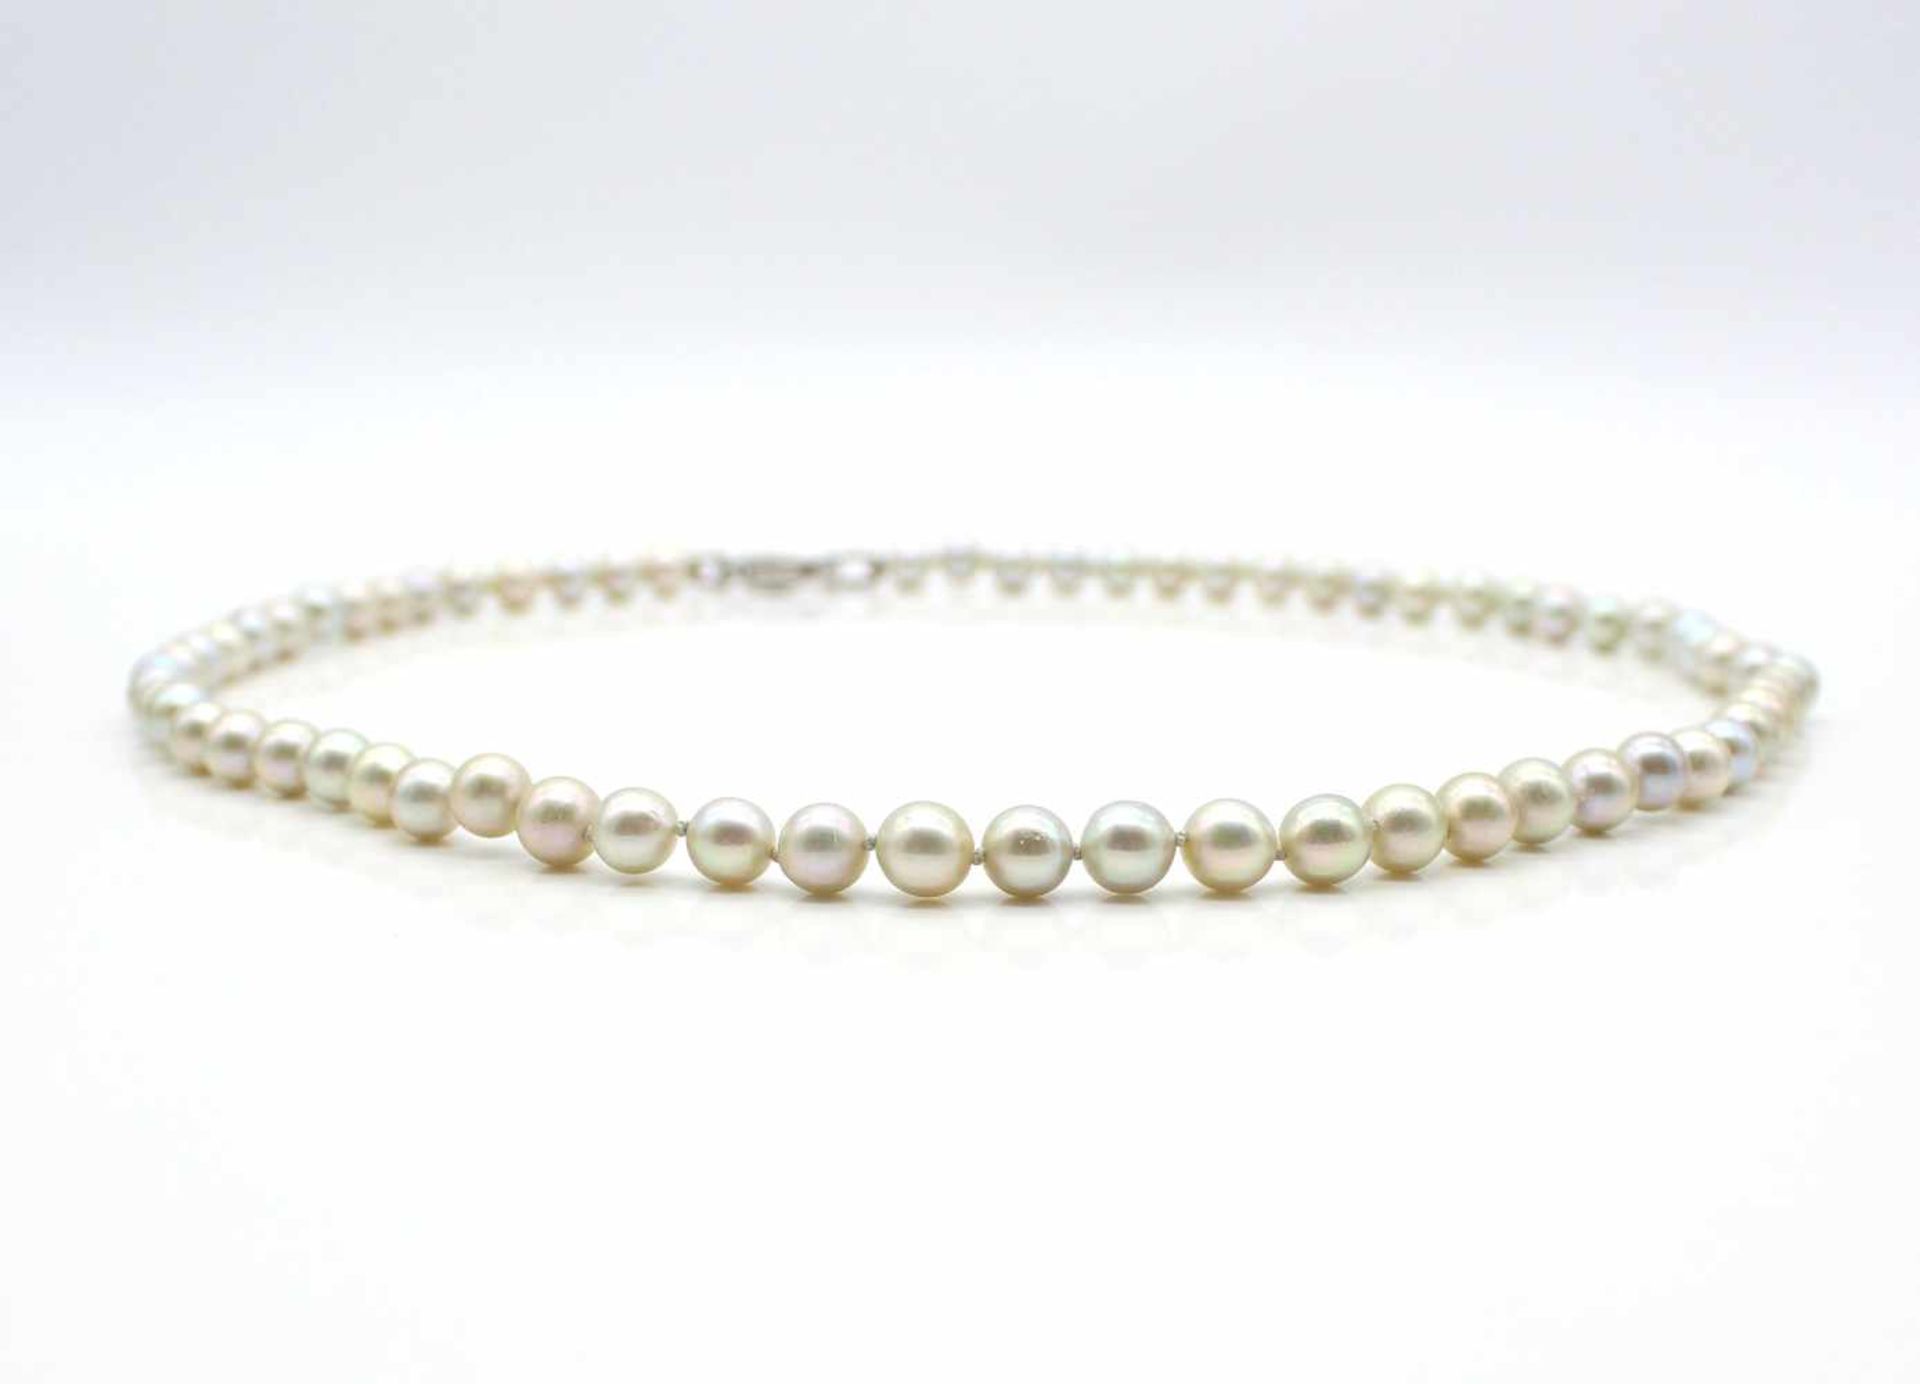 Akoya cultured pearl necklace, diameter 7.0 to 7.4 mm, lock tested on 585 gold with 30 diamonds, - Bild 3 aus 3